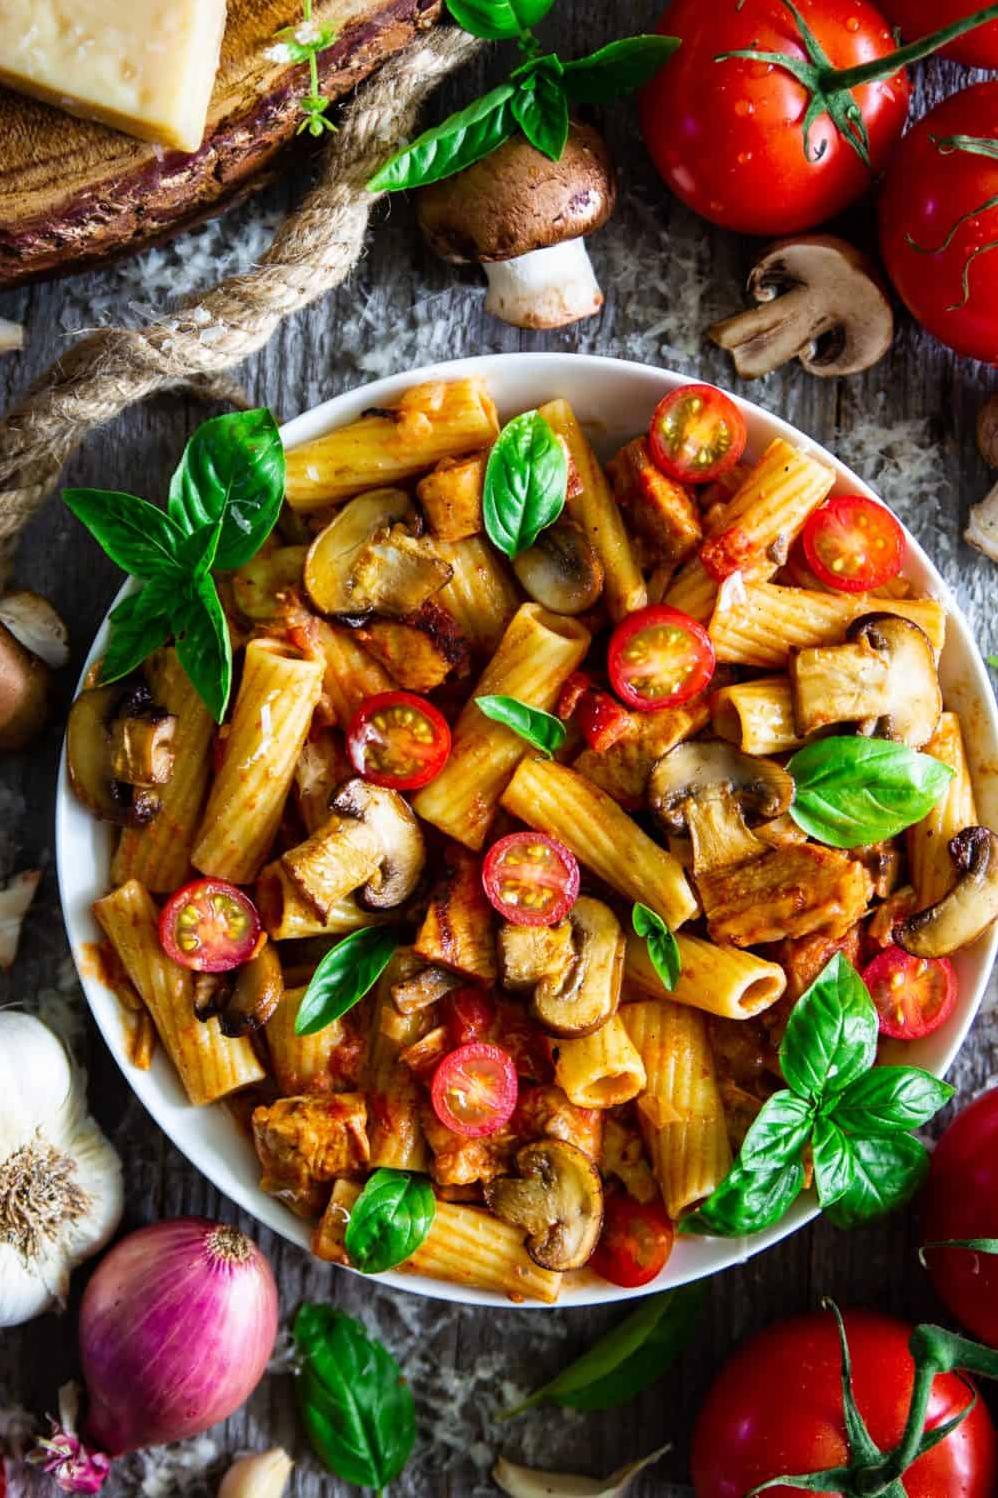  Serving rigatoni with chicken and mushroom sauce is always a crowd-pleaser.